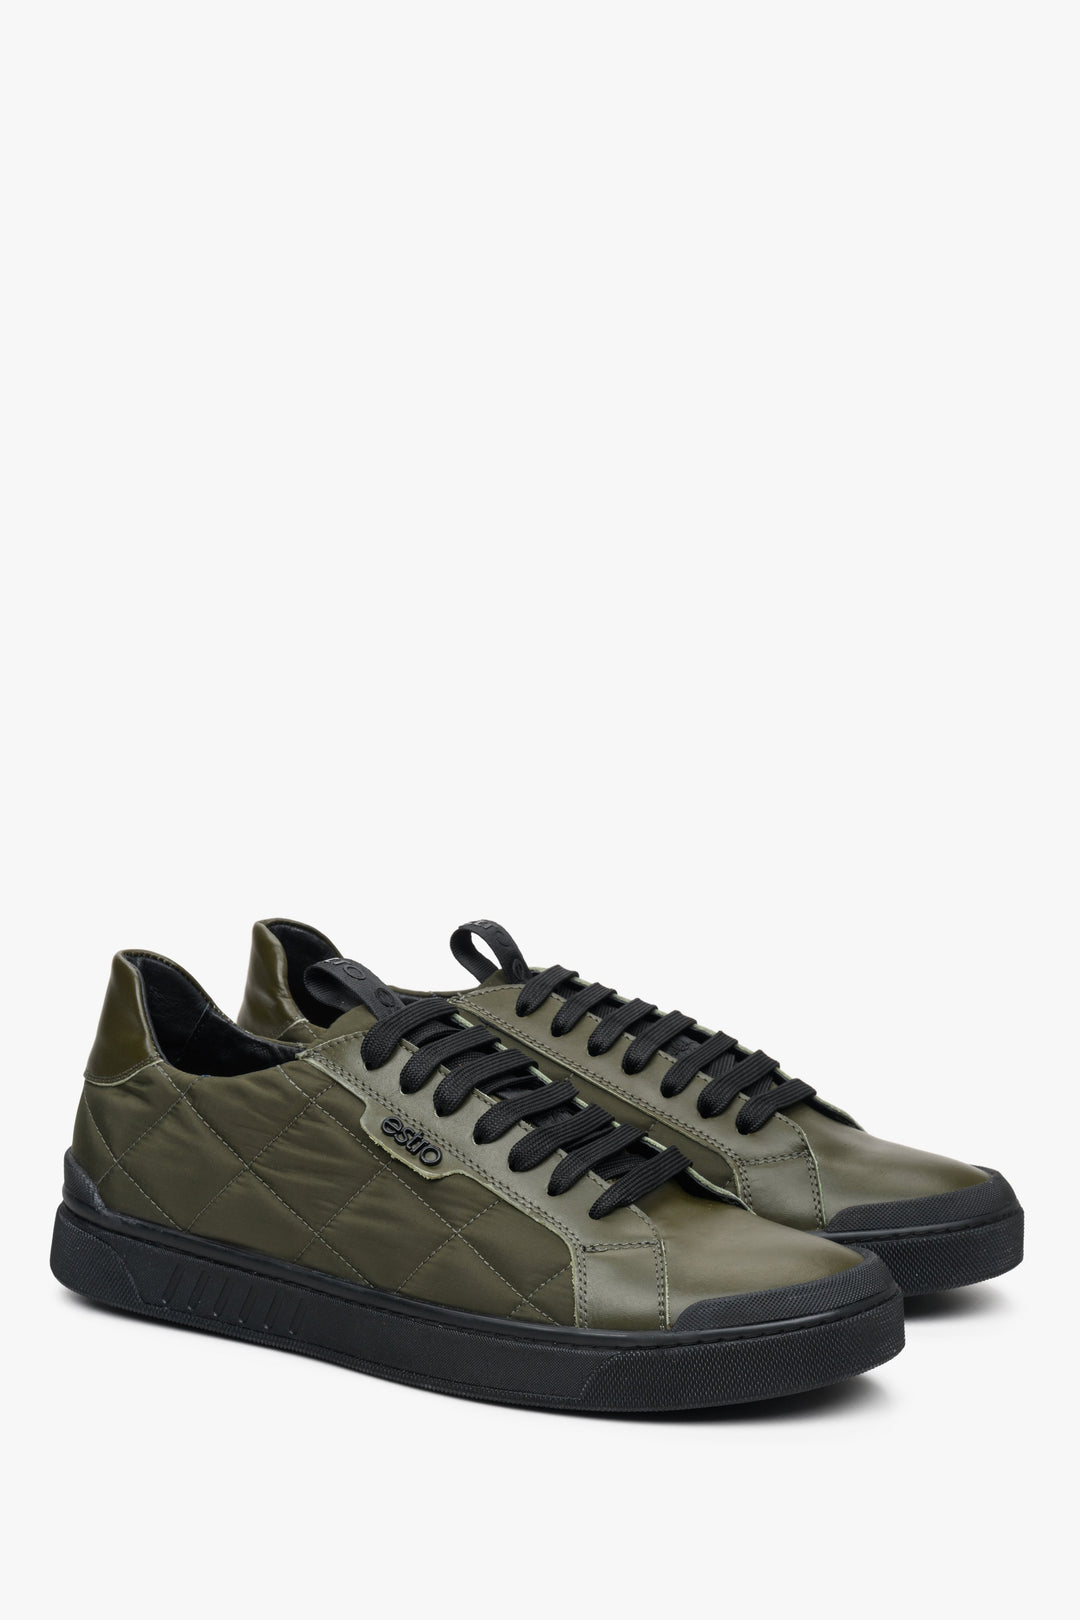 Green textile Estro men's sneakers with quilting for spring and jresien - presentation of the top and side seam of the shoes.